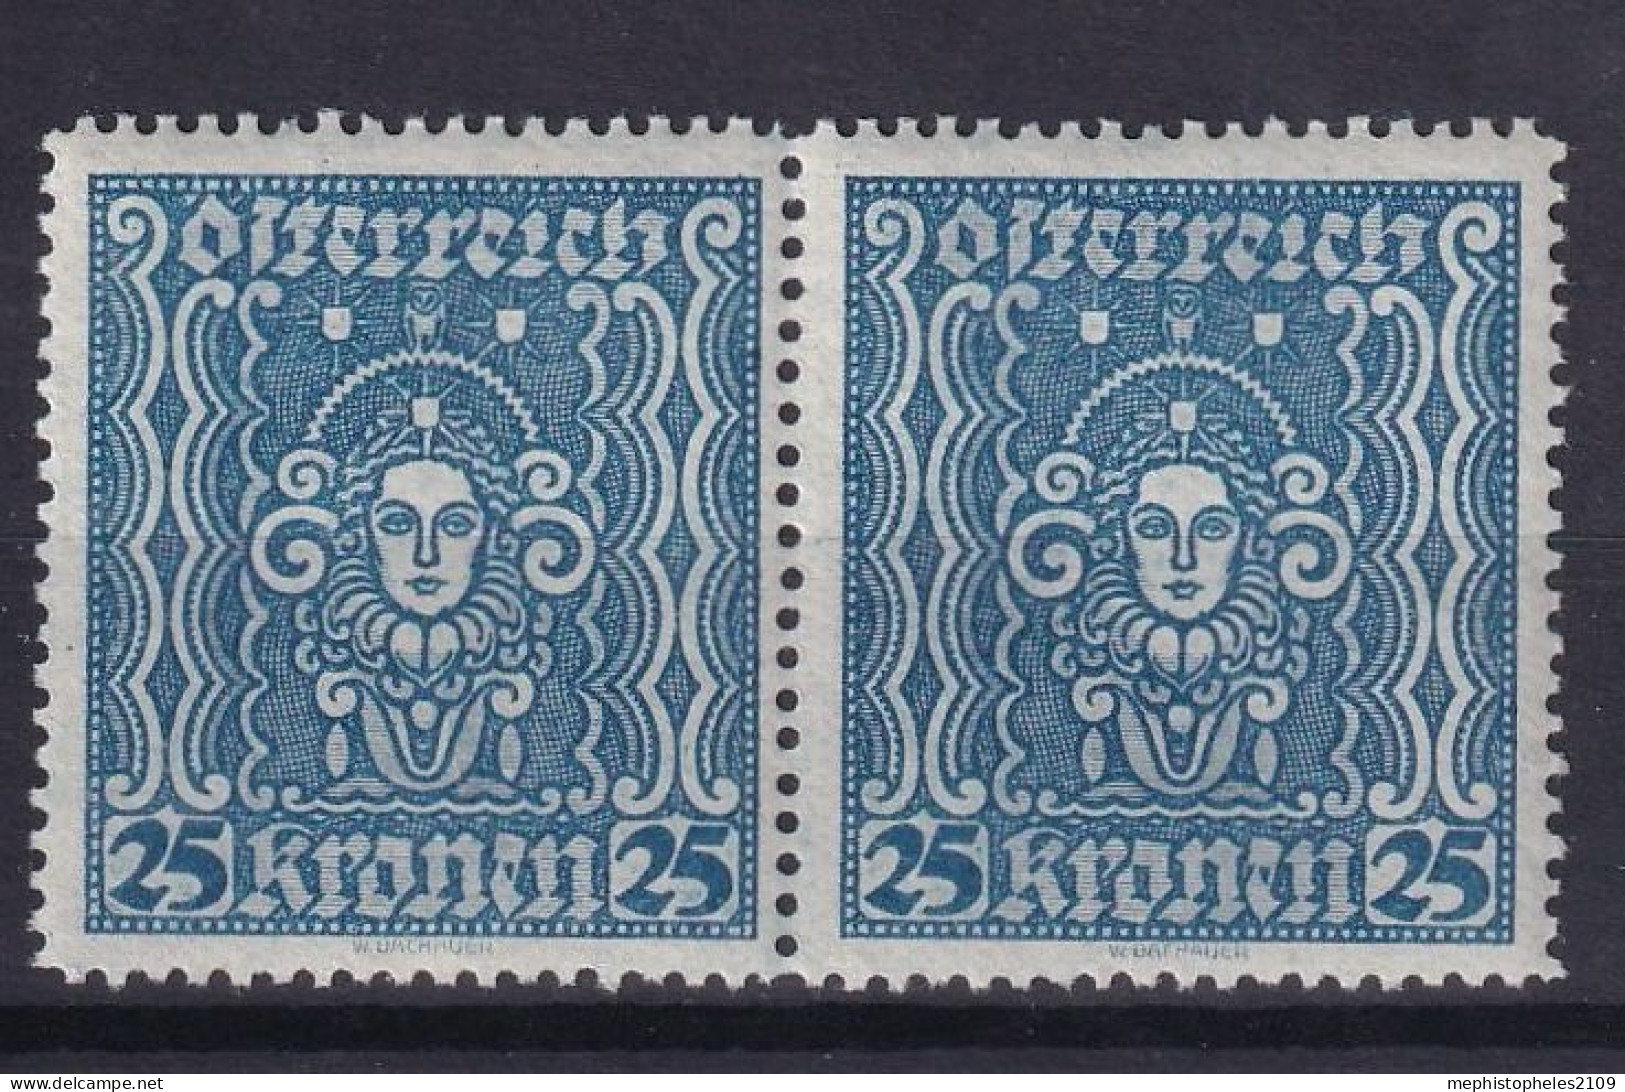 AUSTRIA 1922/24 - MNH - ANK 399a II - Pair! - Unused Stamps